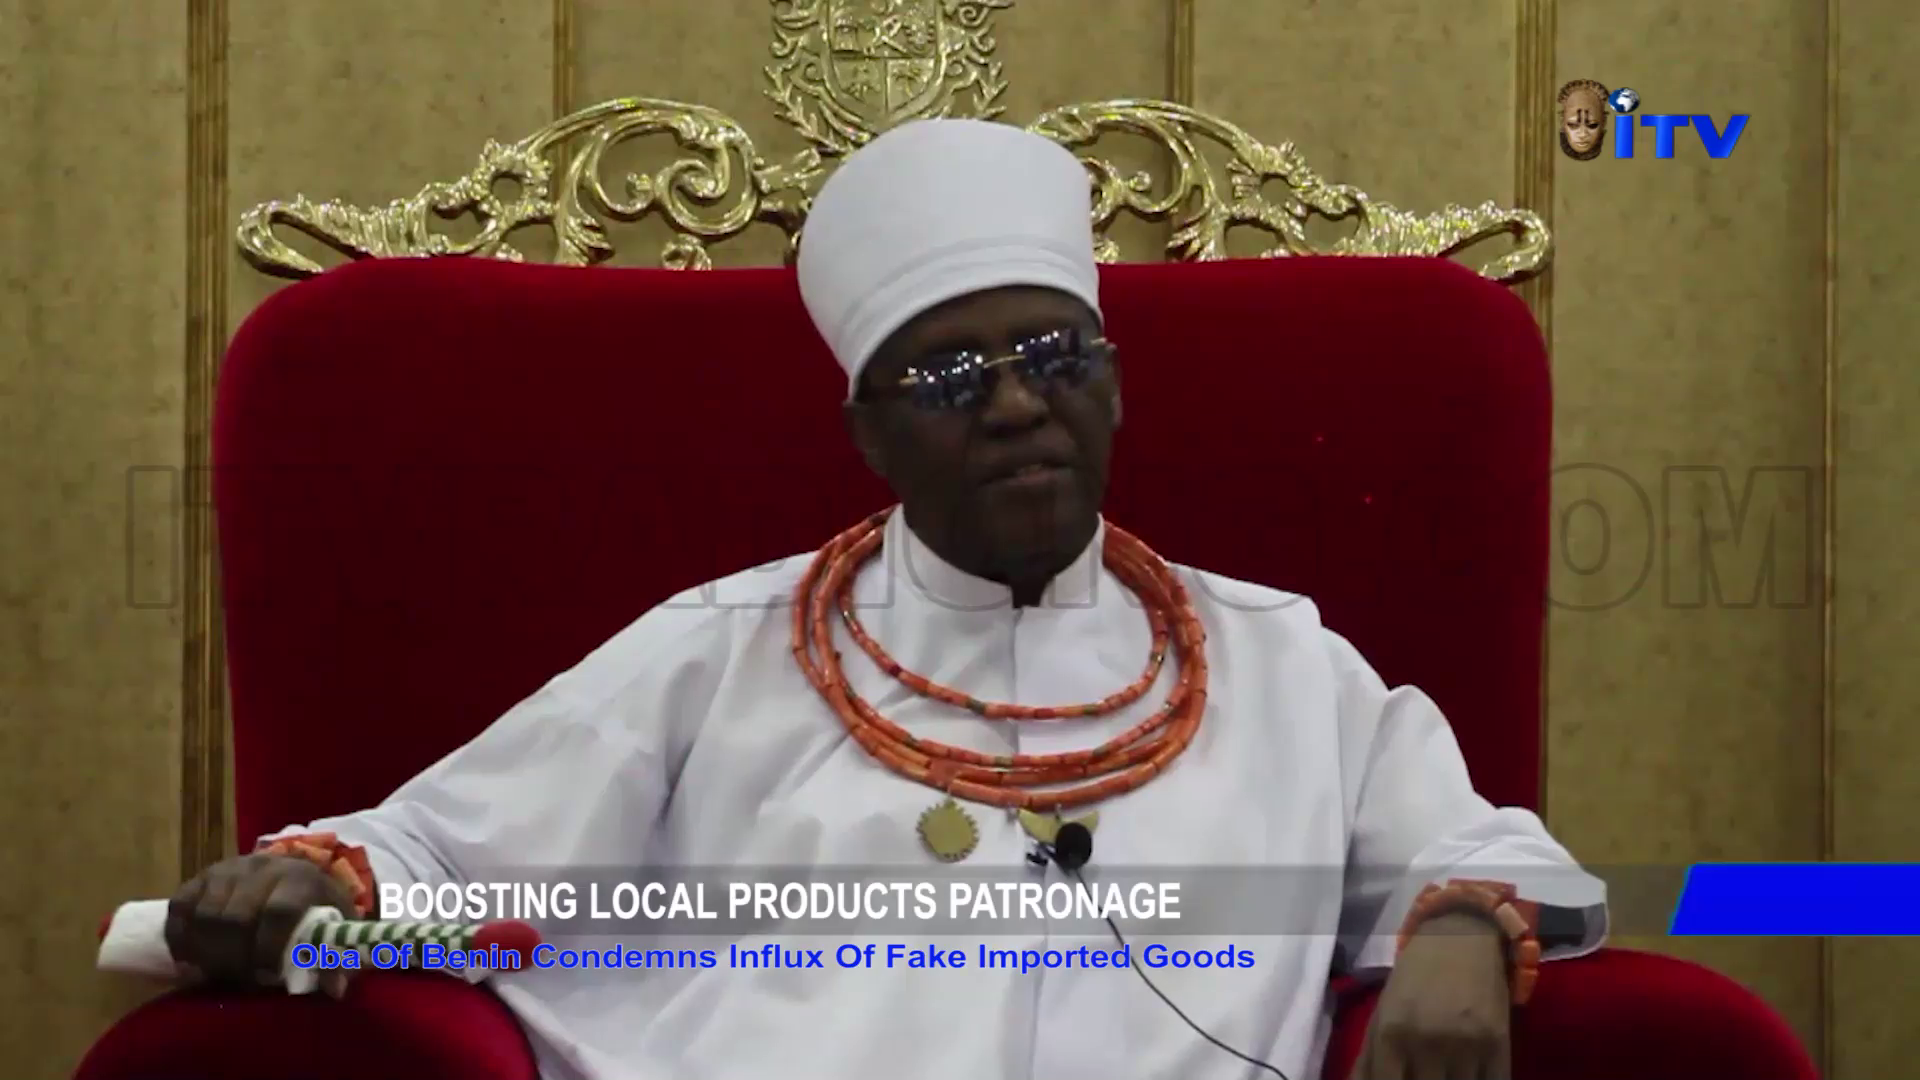 Oba Of Benin Condemns Influx Of Fake Imported Goods